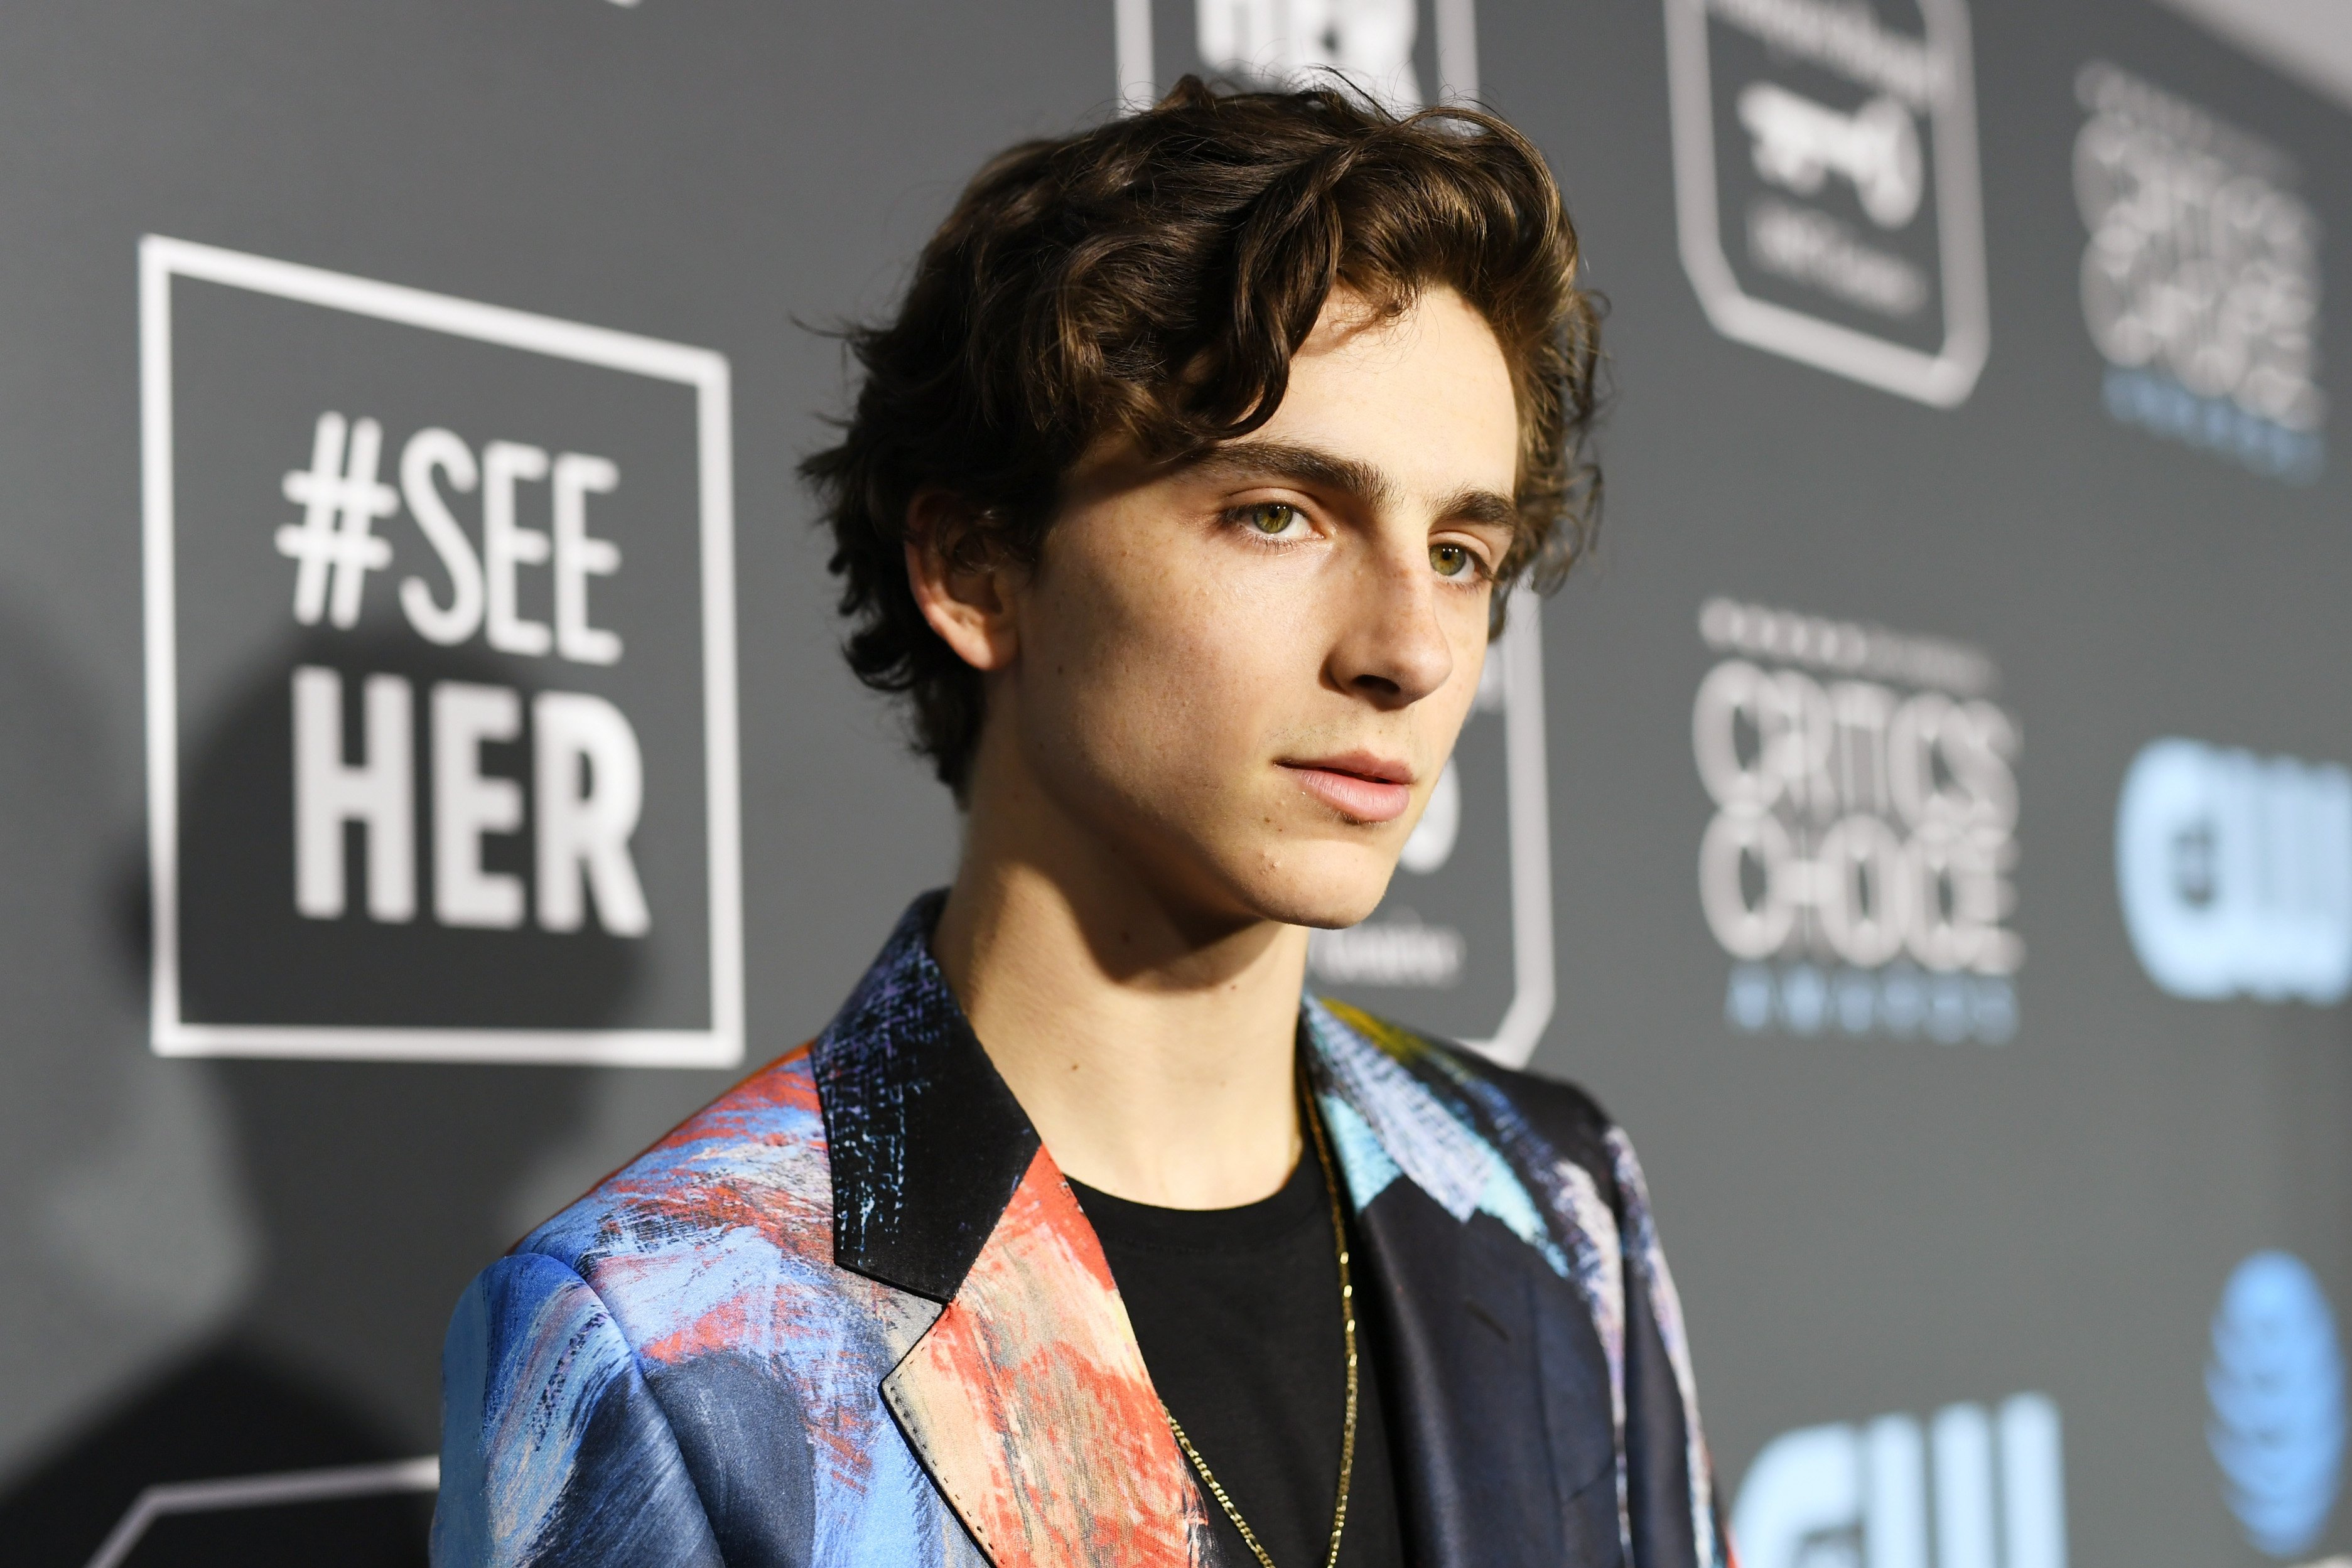 Timothée Chalamet at the 24th annual Critics' Choice Awards on January 13, 2019, in Santa Monica, California. | Source: Getty Images